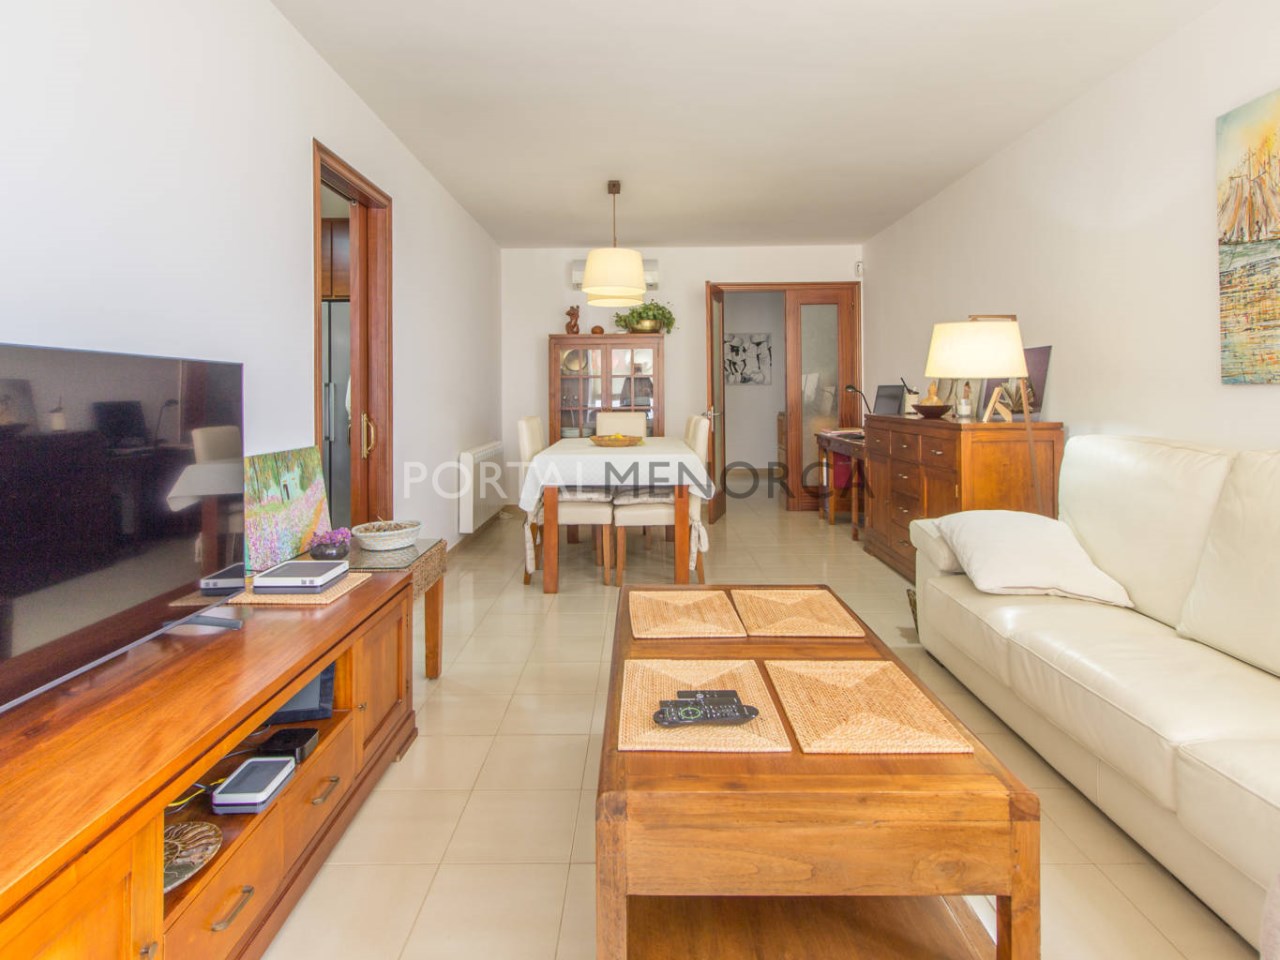 Renovated flat for sale in Sant Lluís